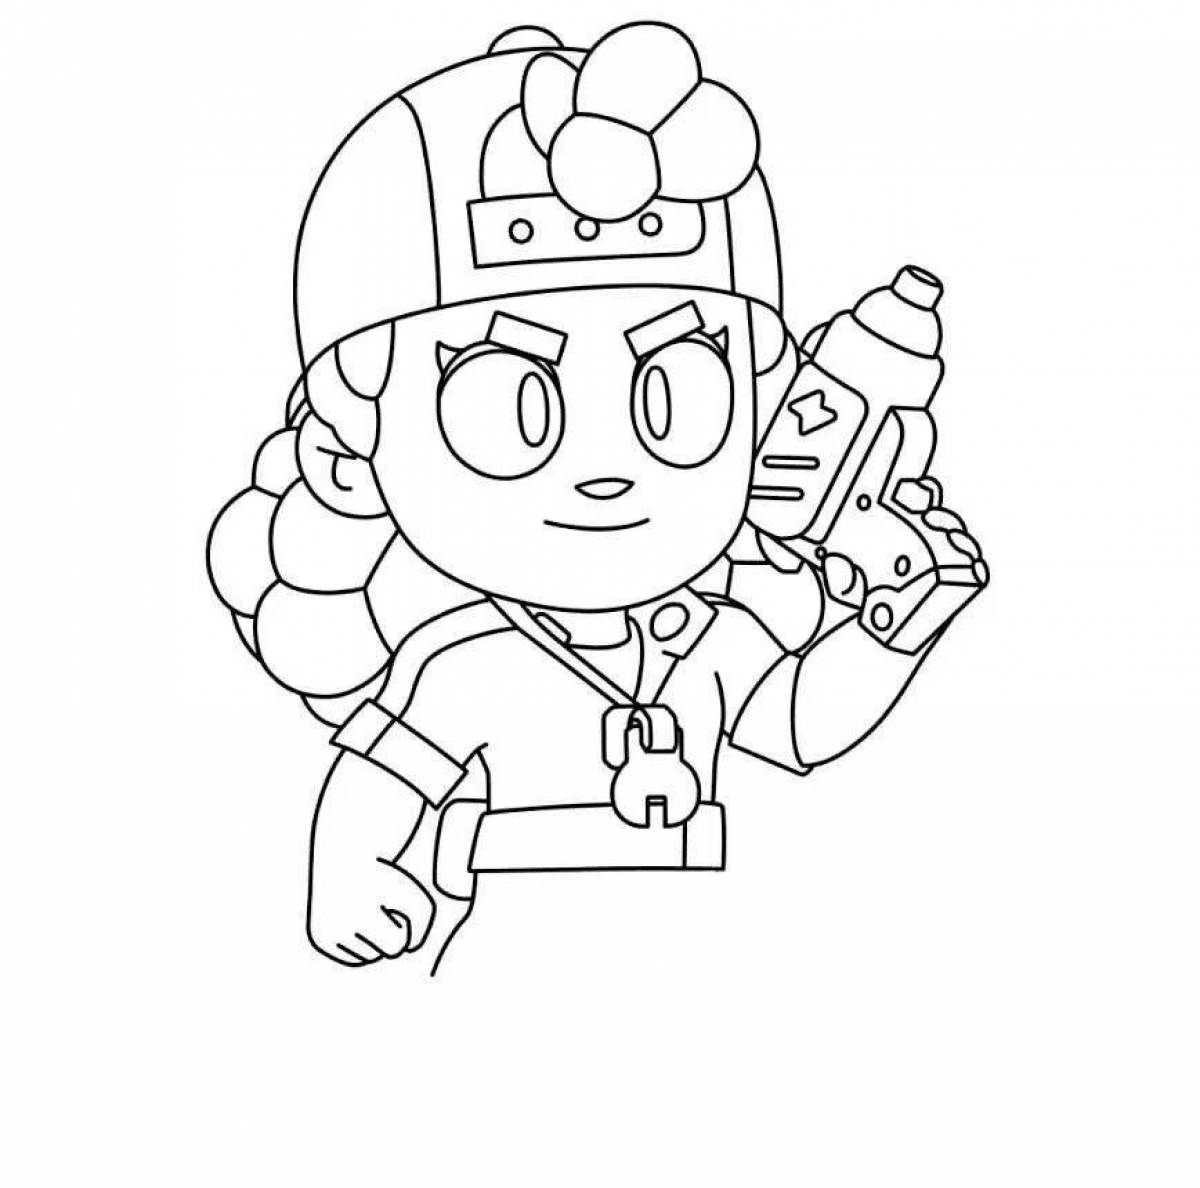 Buster brawl stars colorful coloring page